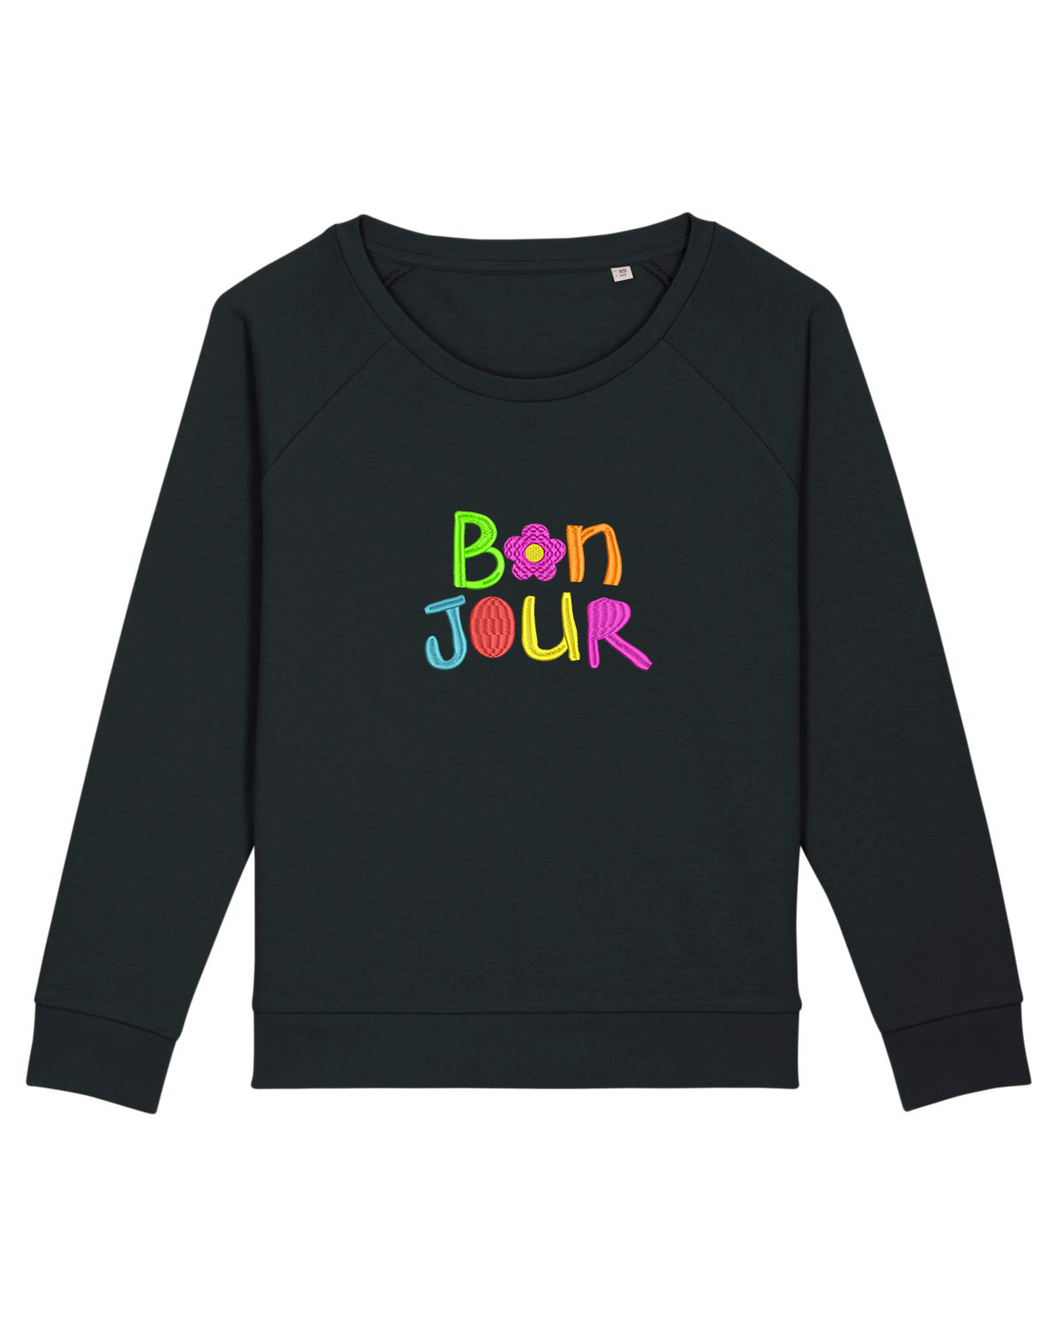 B🌸N JOUR- Embroidered WOMEN'S RELAXED FIT SWEATSHIRT